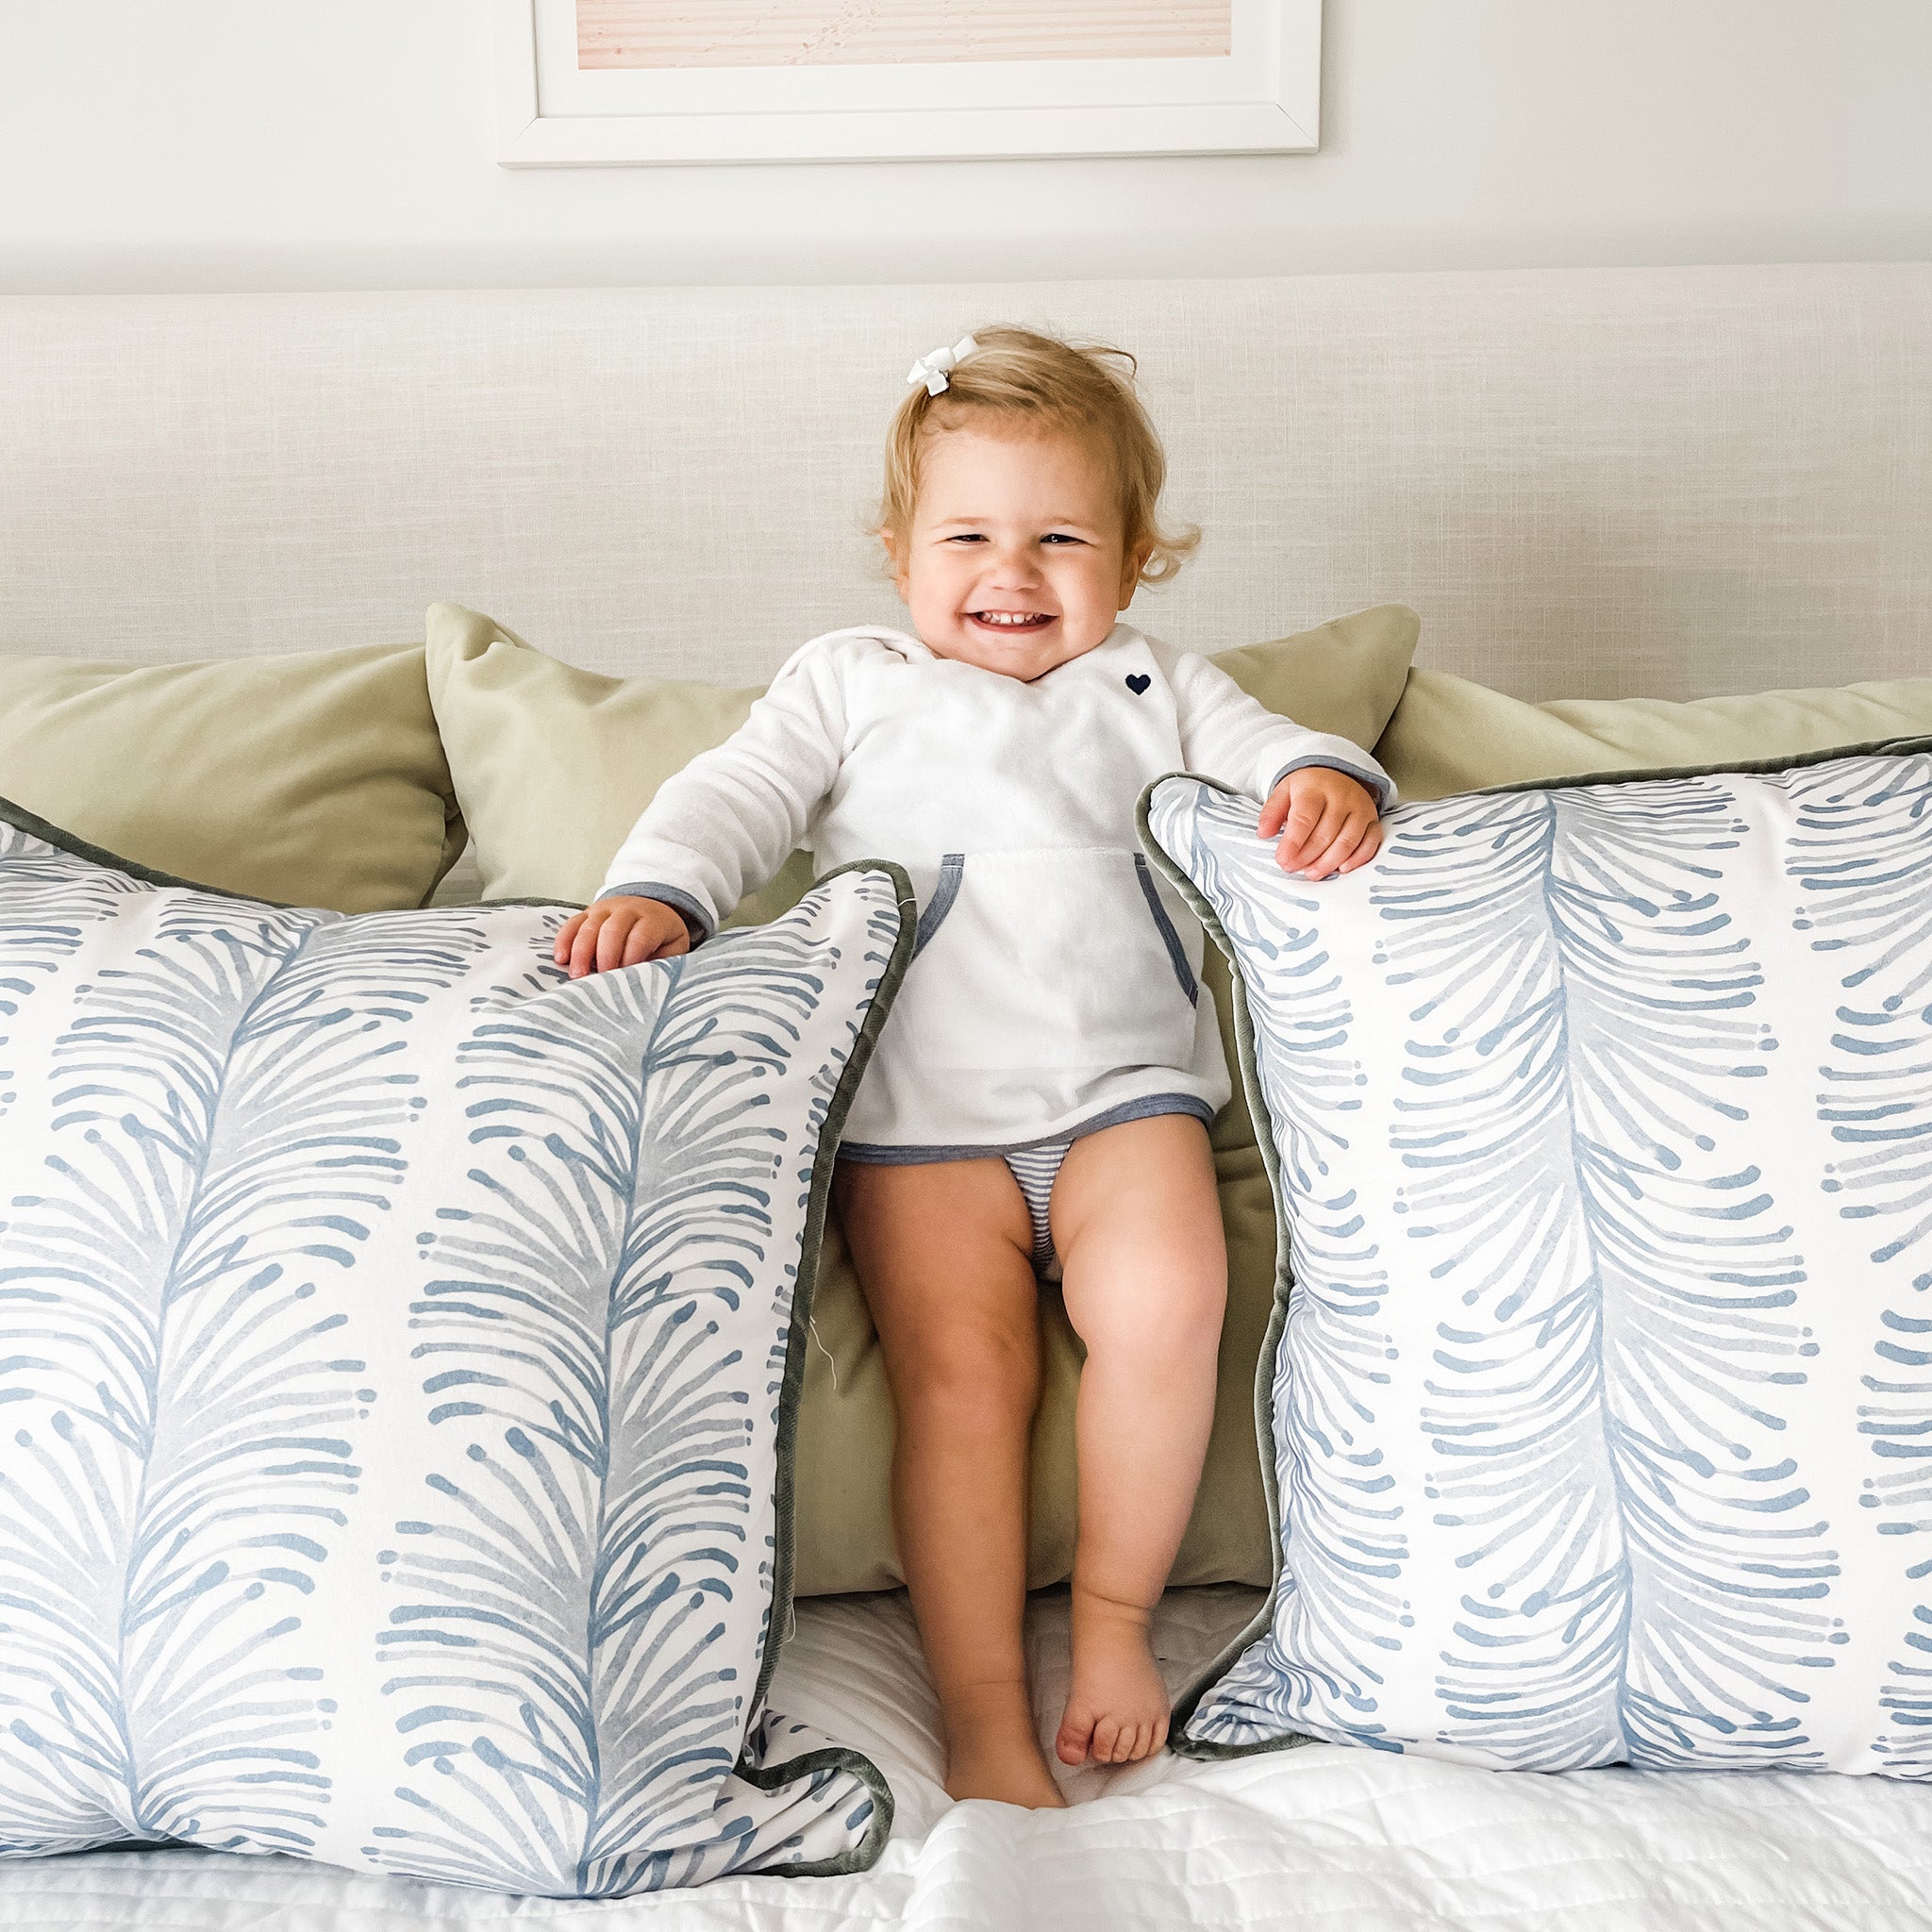 Bed Close-up with blonde joyous baby wearing white long sleeve in between two Sky Blue Botanical Stripe Printed Pillows